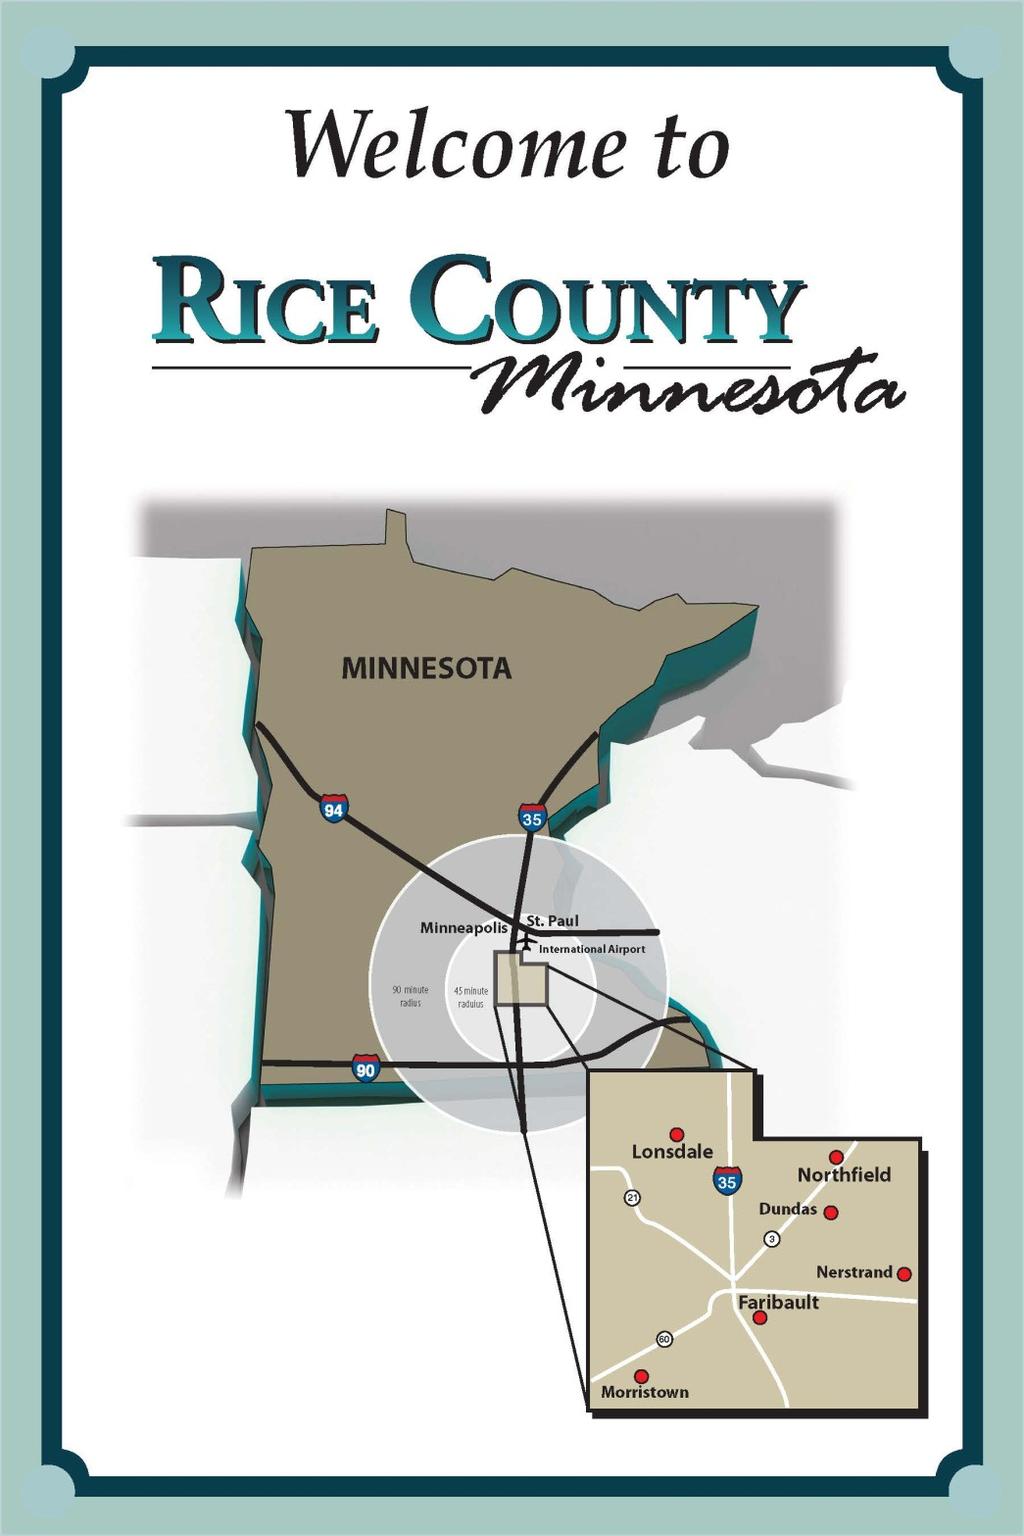 companies Where is RICE COUNTY our